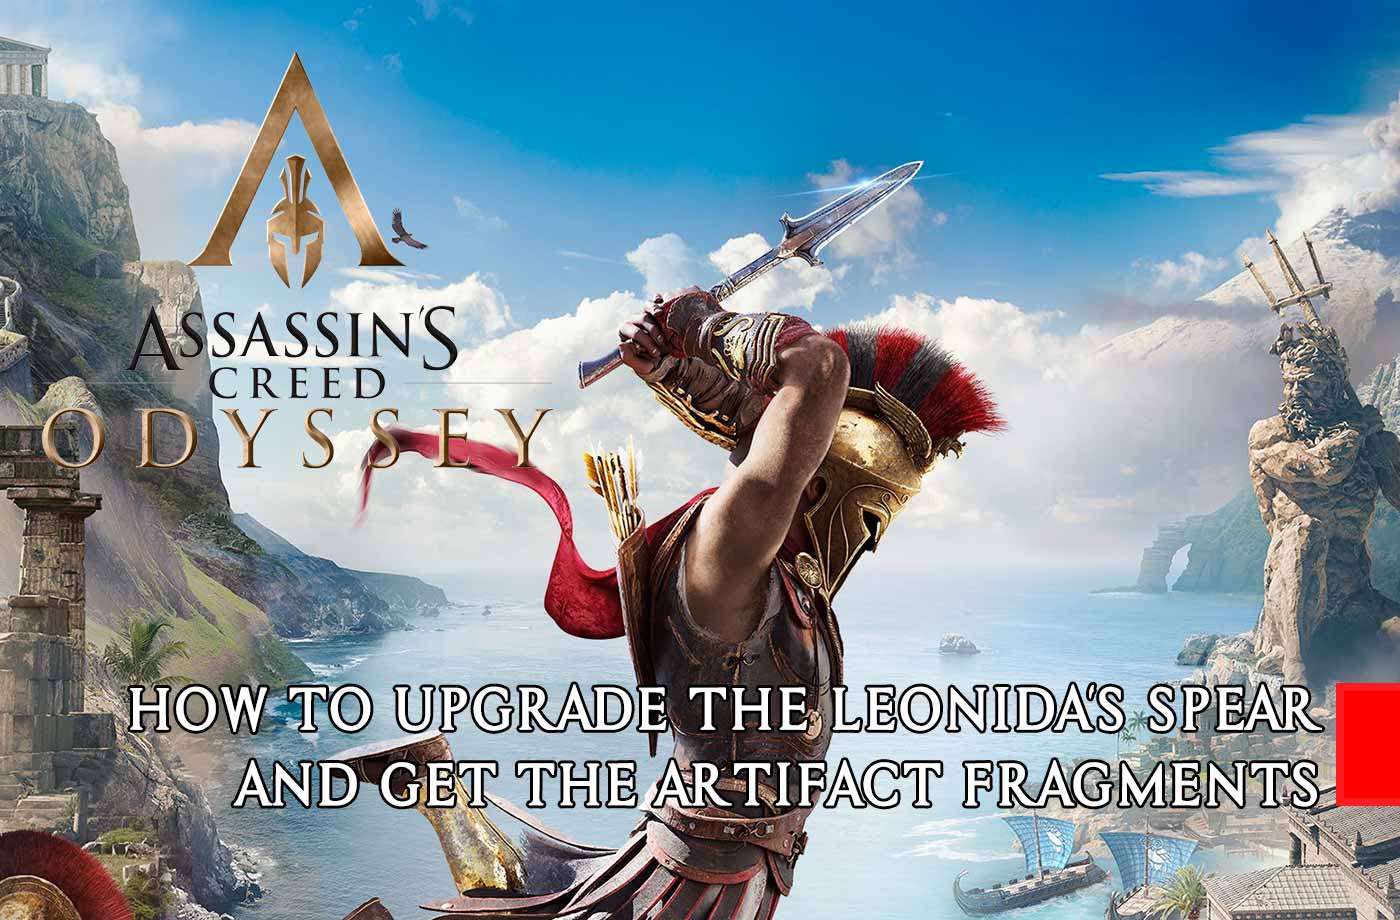 Wiki Assassin's Creed Odyssey upgrading the Leonidas spear and artifact fragments | Kill